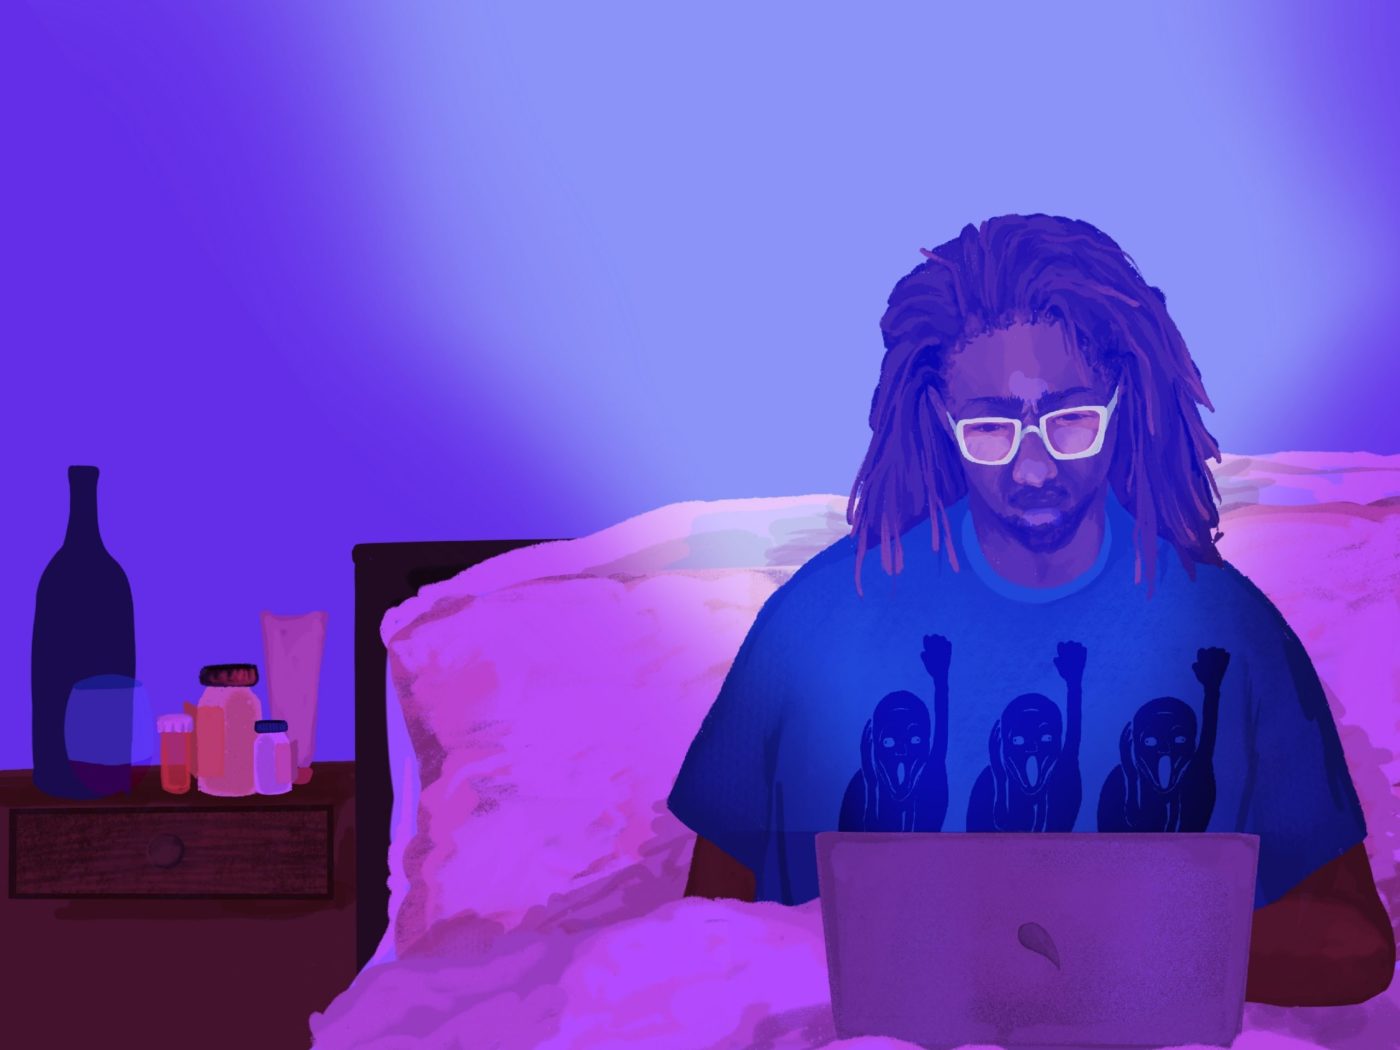 Illustration of Black man sitting in bed with laptop. He has shoulder length hair and white glasses and is wearing a T-shirt that shows three people with fists in the air. Bottles sit on a night stand on one side of the image.